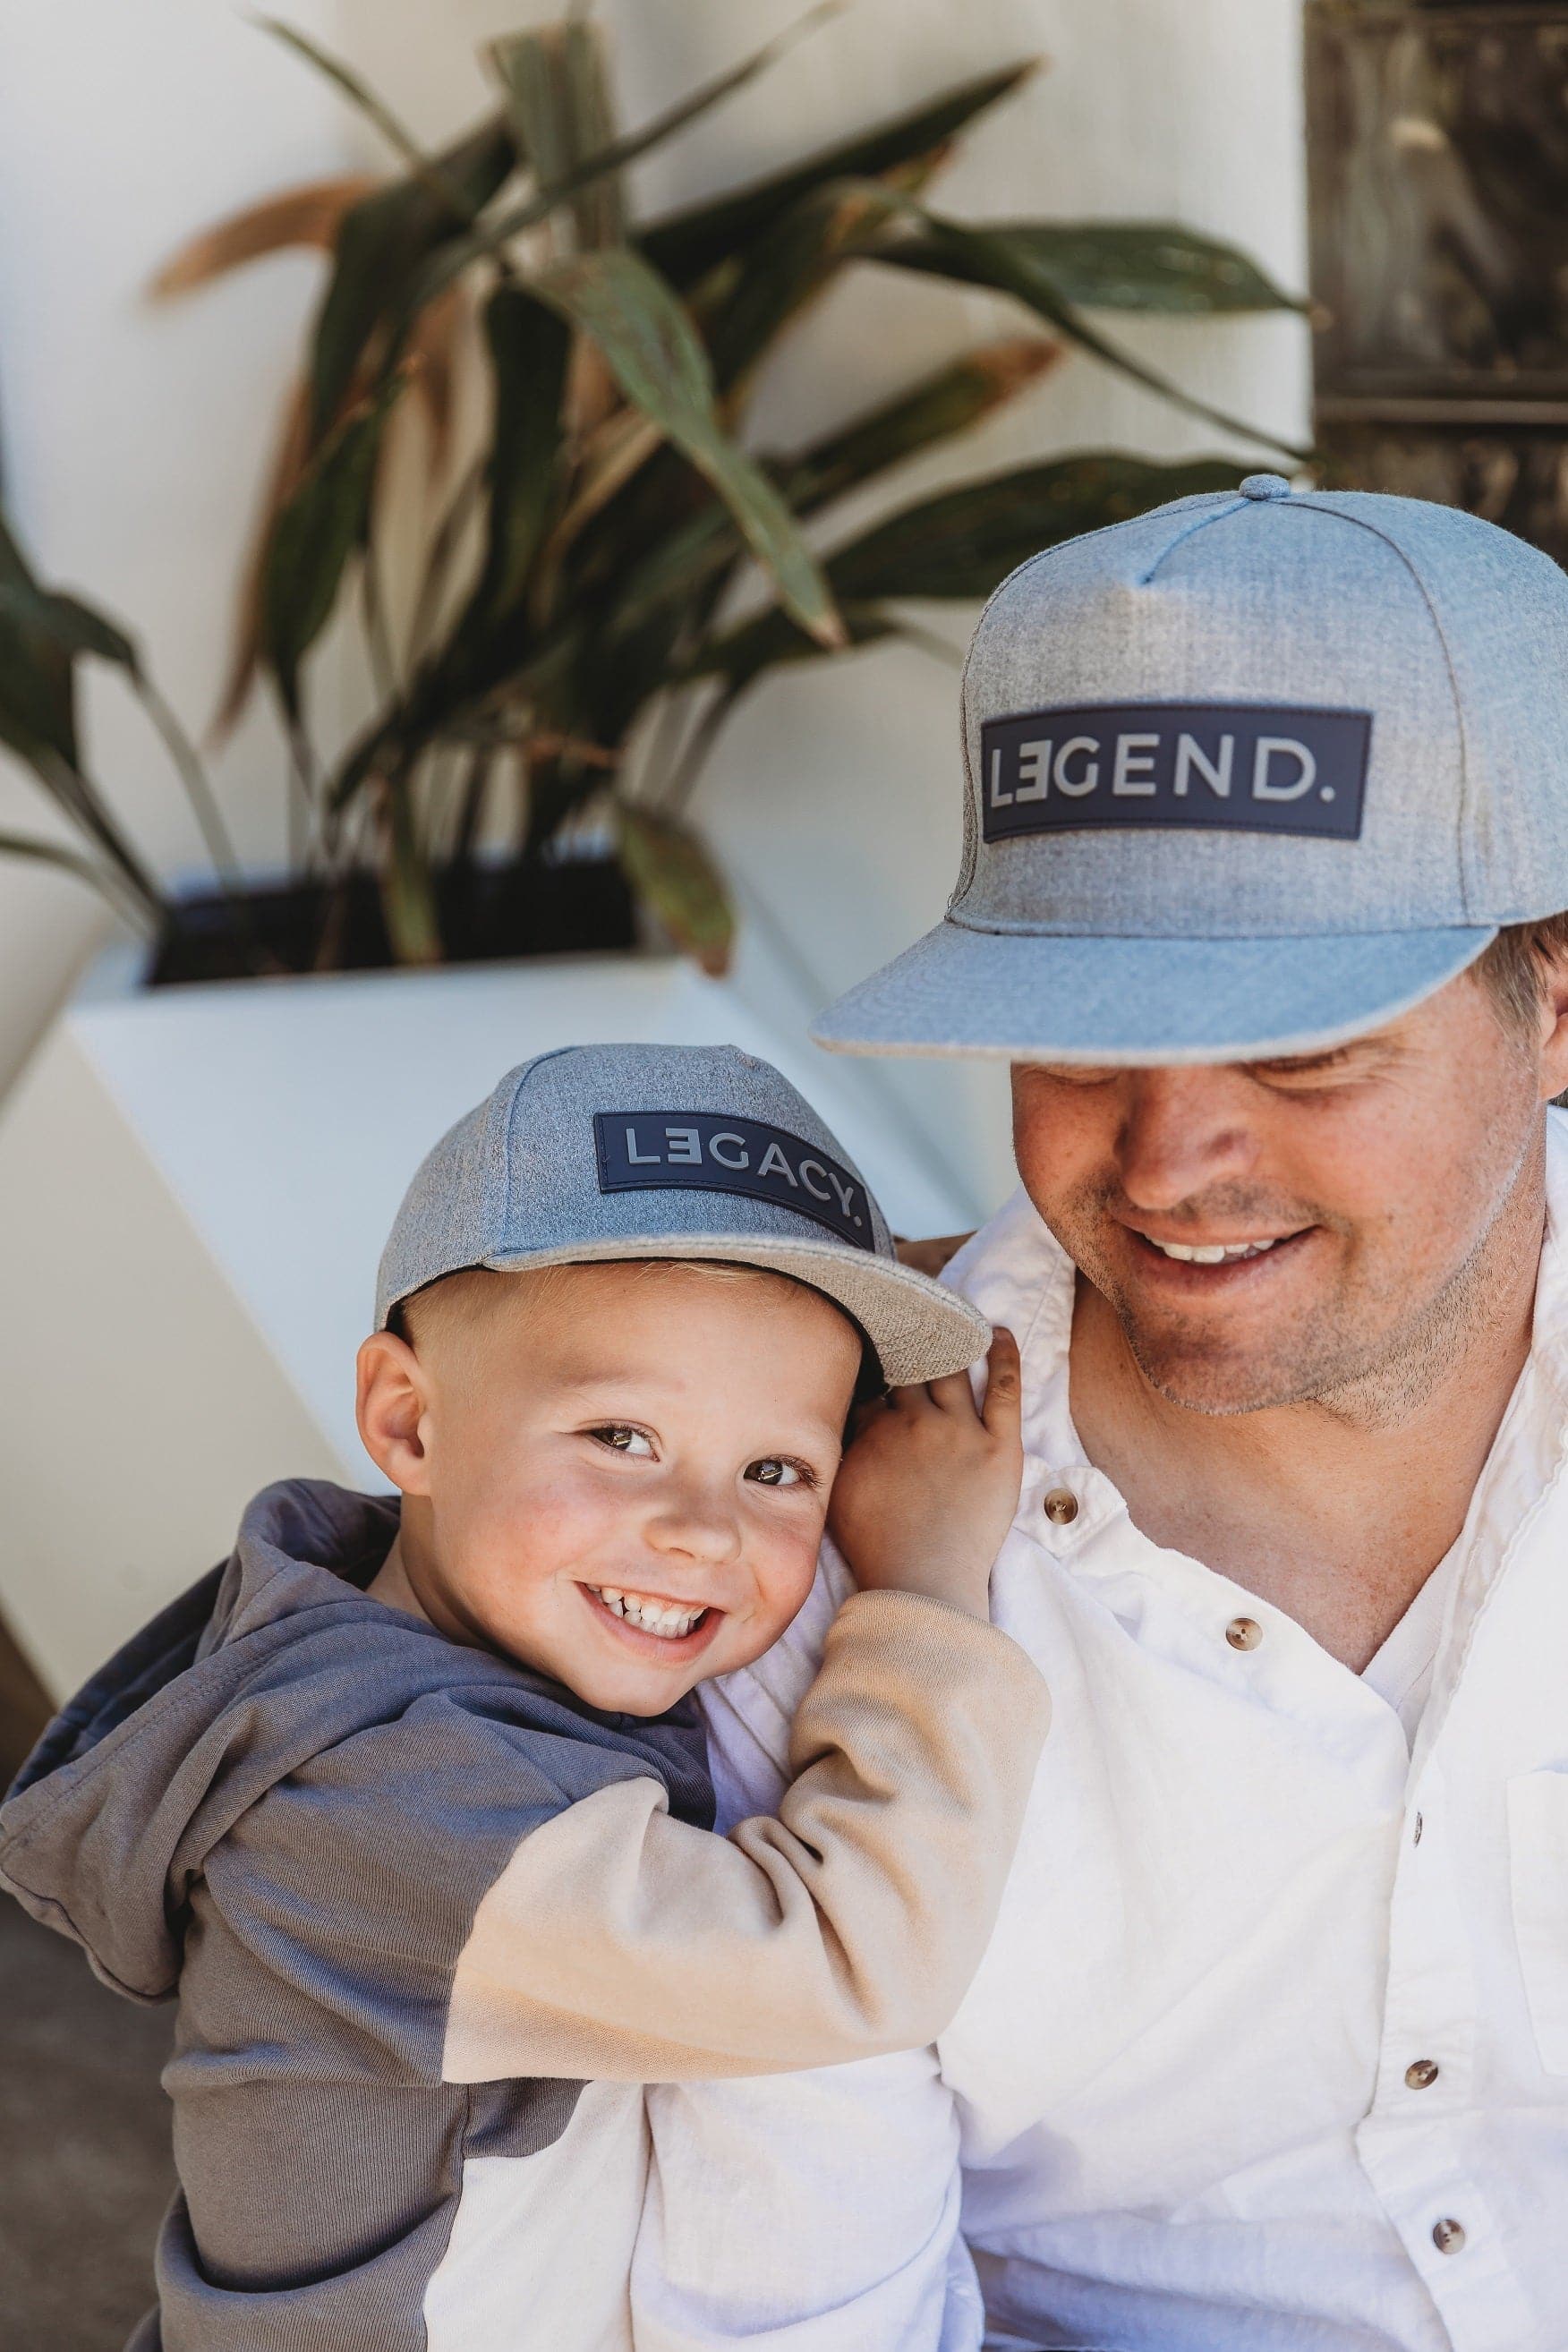 Father and Son Hats, Legend and Legacy Hats, Fathers Day Gift, Fathers Day Hat, Dad Hat, Each Hat Is Sold Separately, Not A Set.